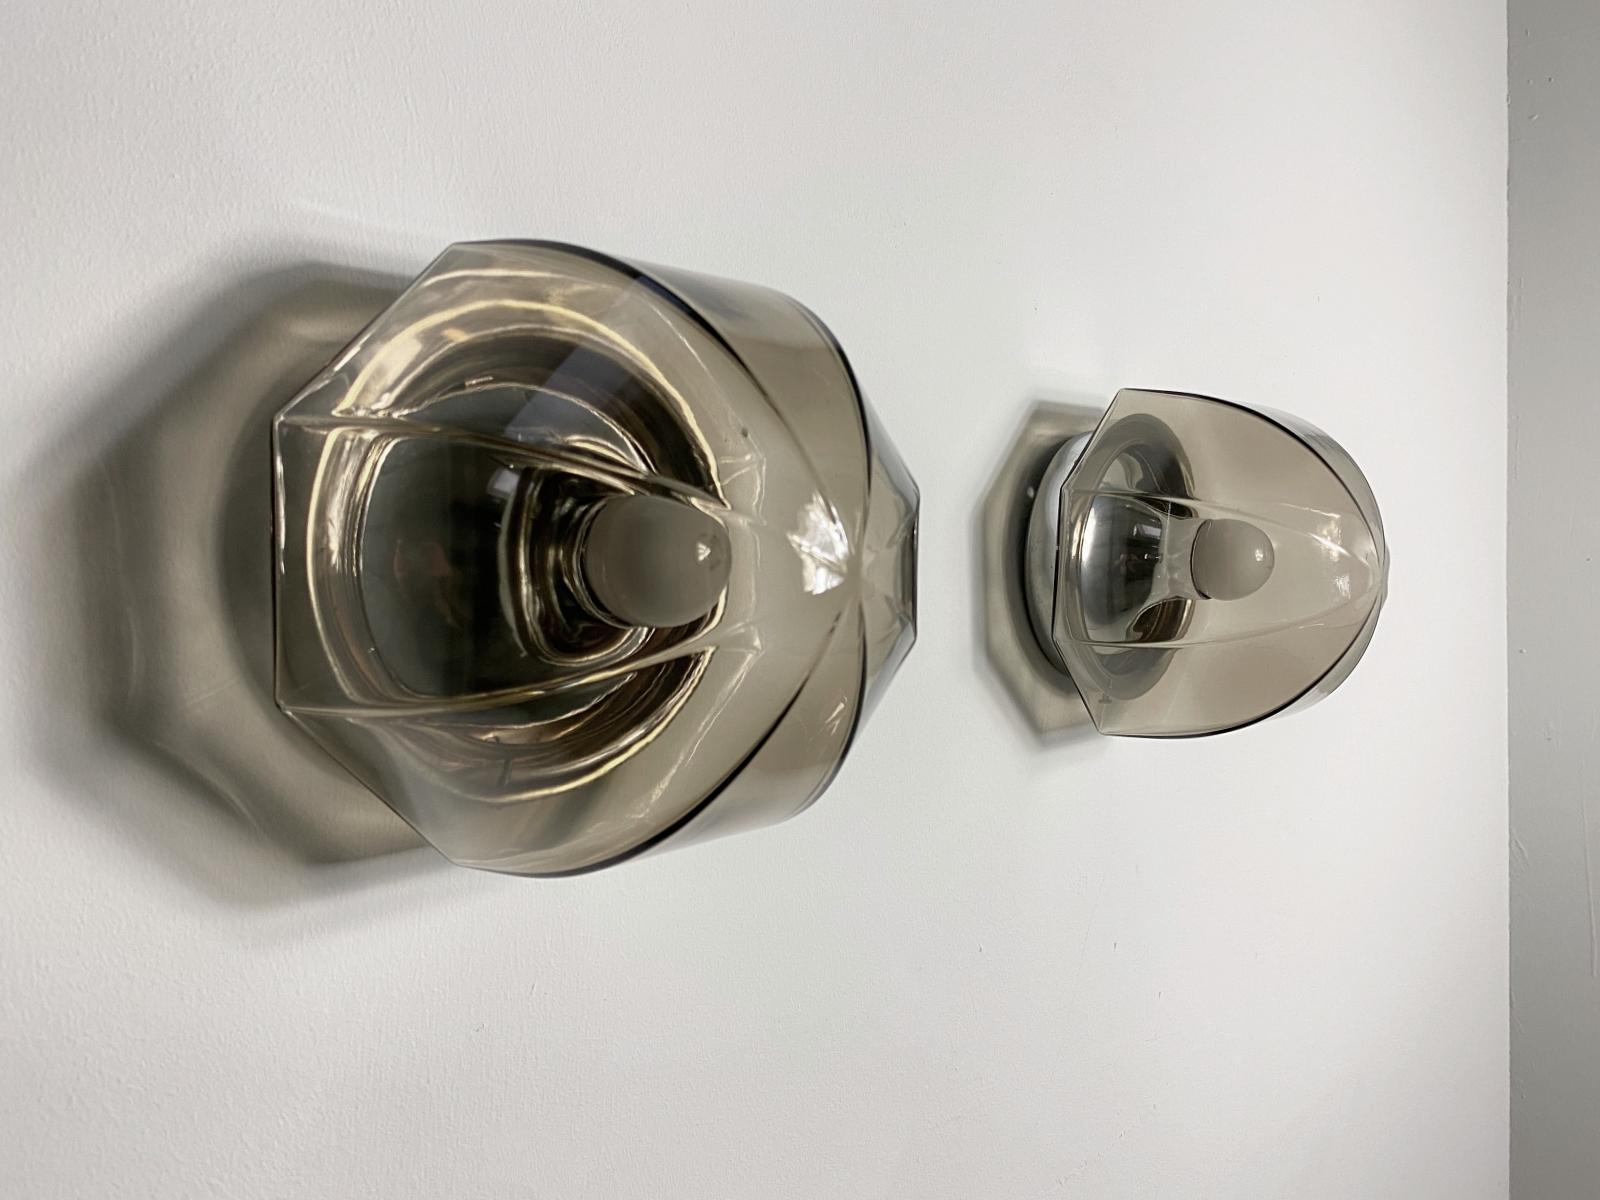 Beautiful wall or ceiling lamps manufactured by Hillebrand in 1970s. Featuring a chrome reflective base with a hand blown smoked glass shade.
Fully working and tested condition with one E27 Edison socket, the lamp work on 220V and 110V. 
